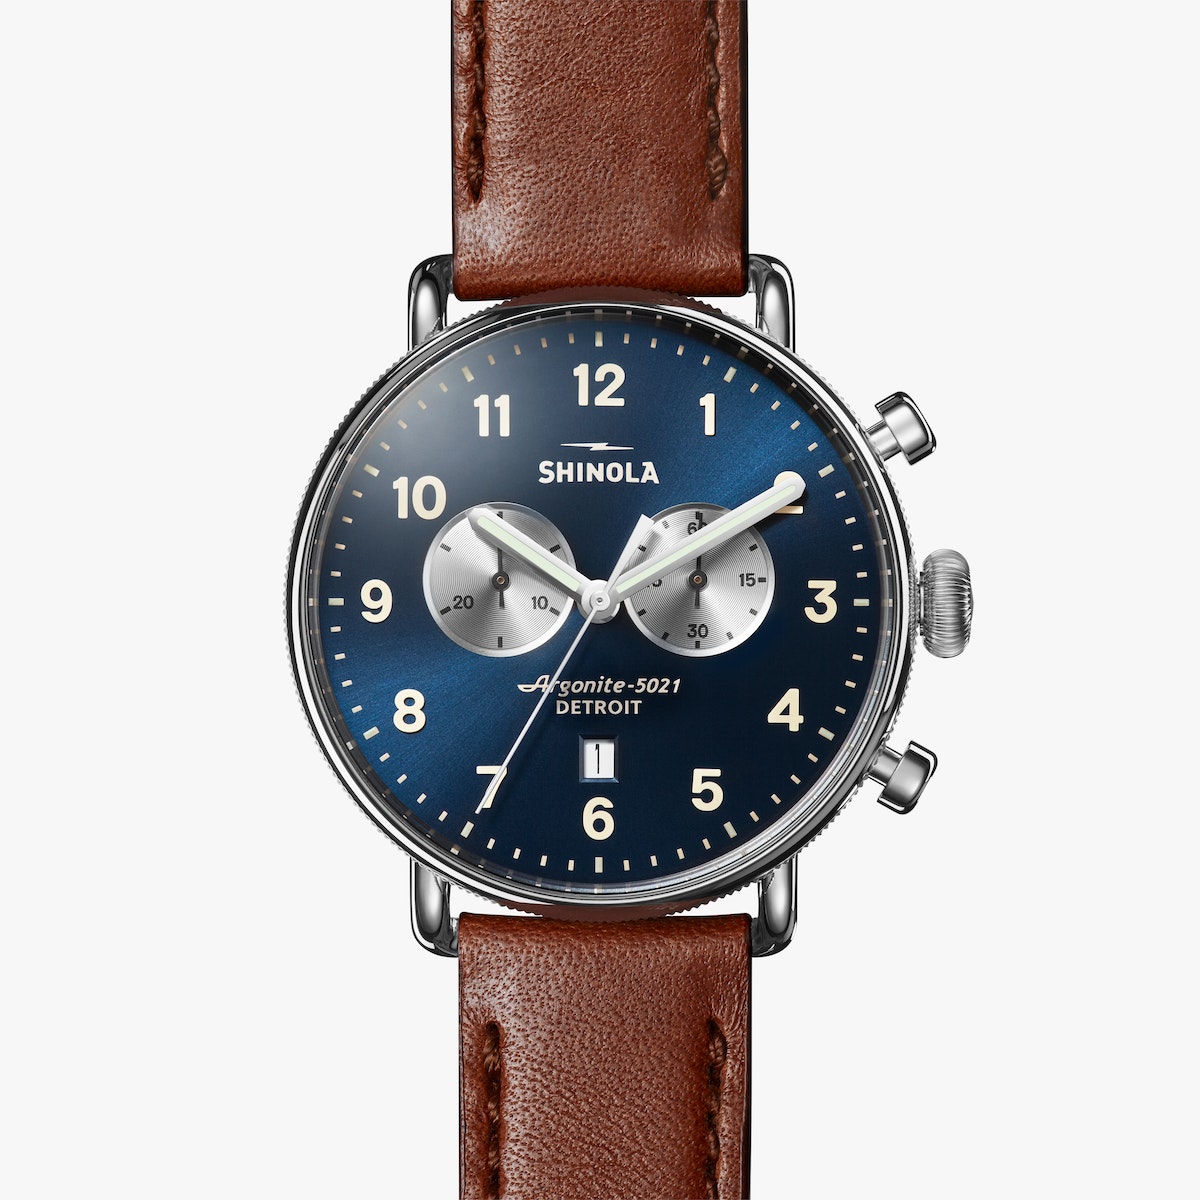 THE CANFIELD CHRONO 43MM | Midnight Blue